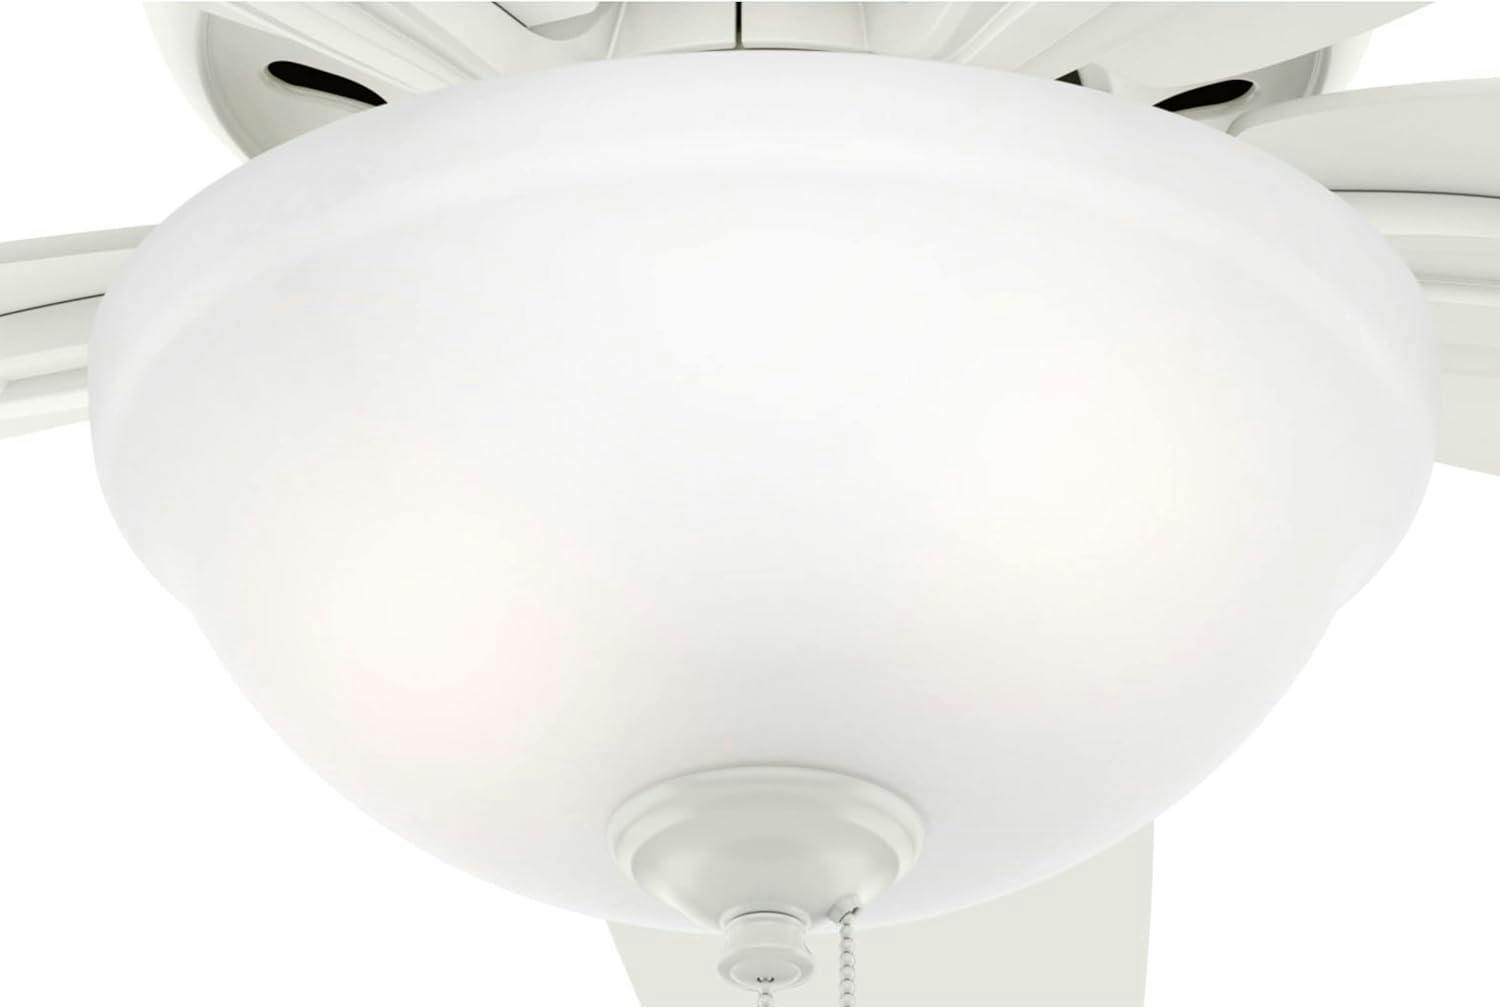 Fresh White 42" Low-Profile LED Ceiling Fan with Whisper-Quiet Motor